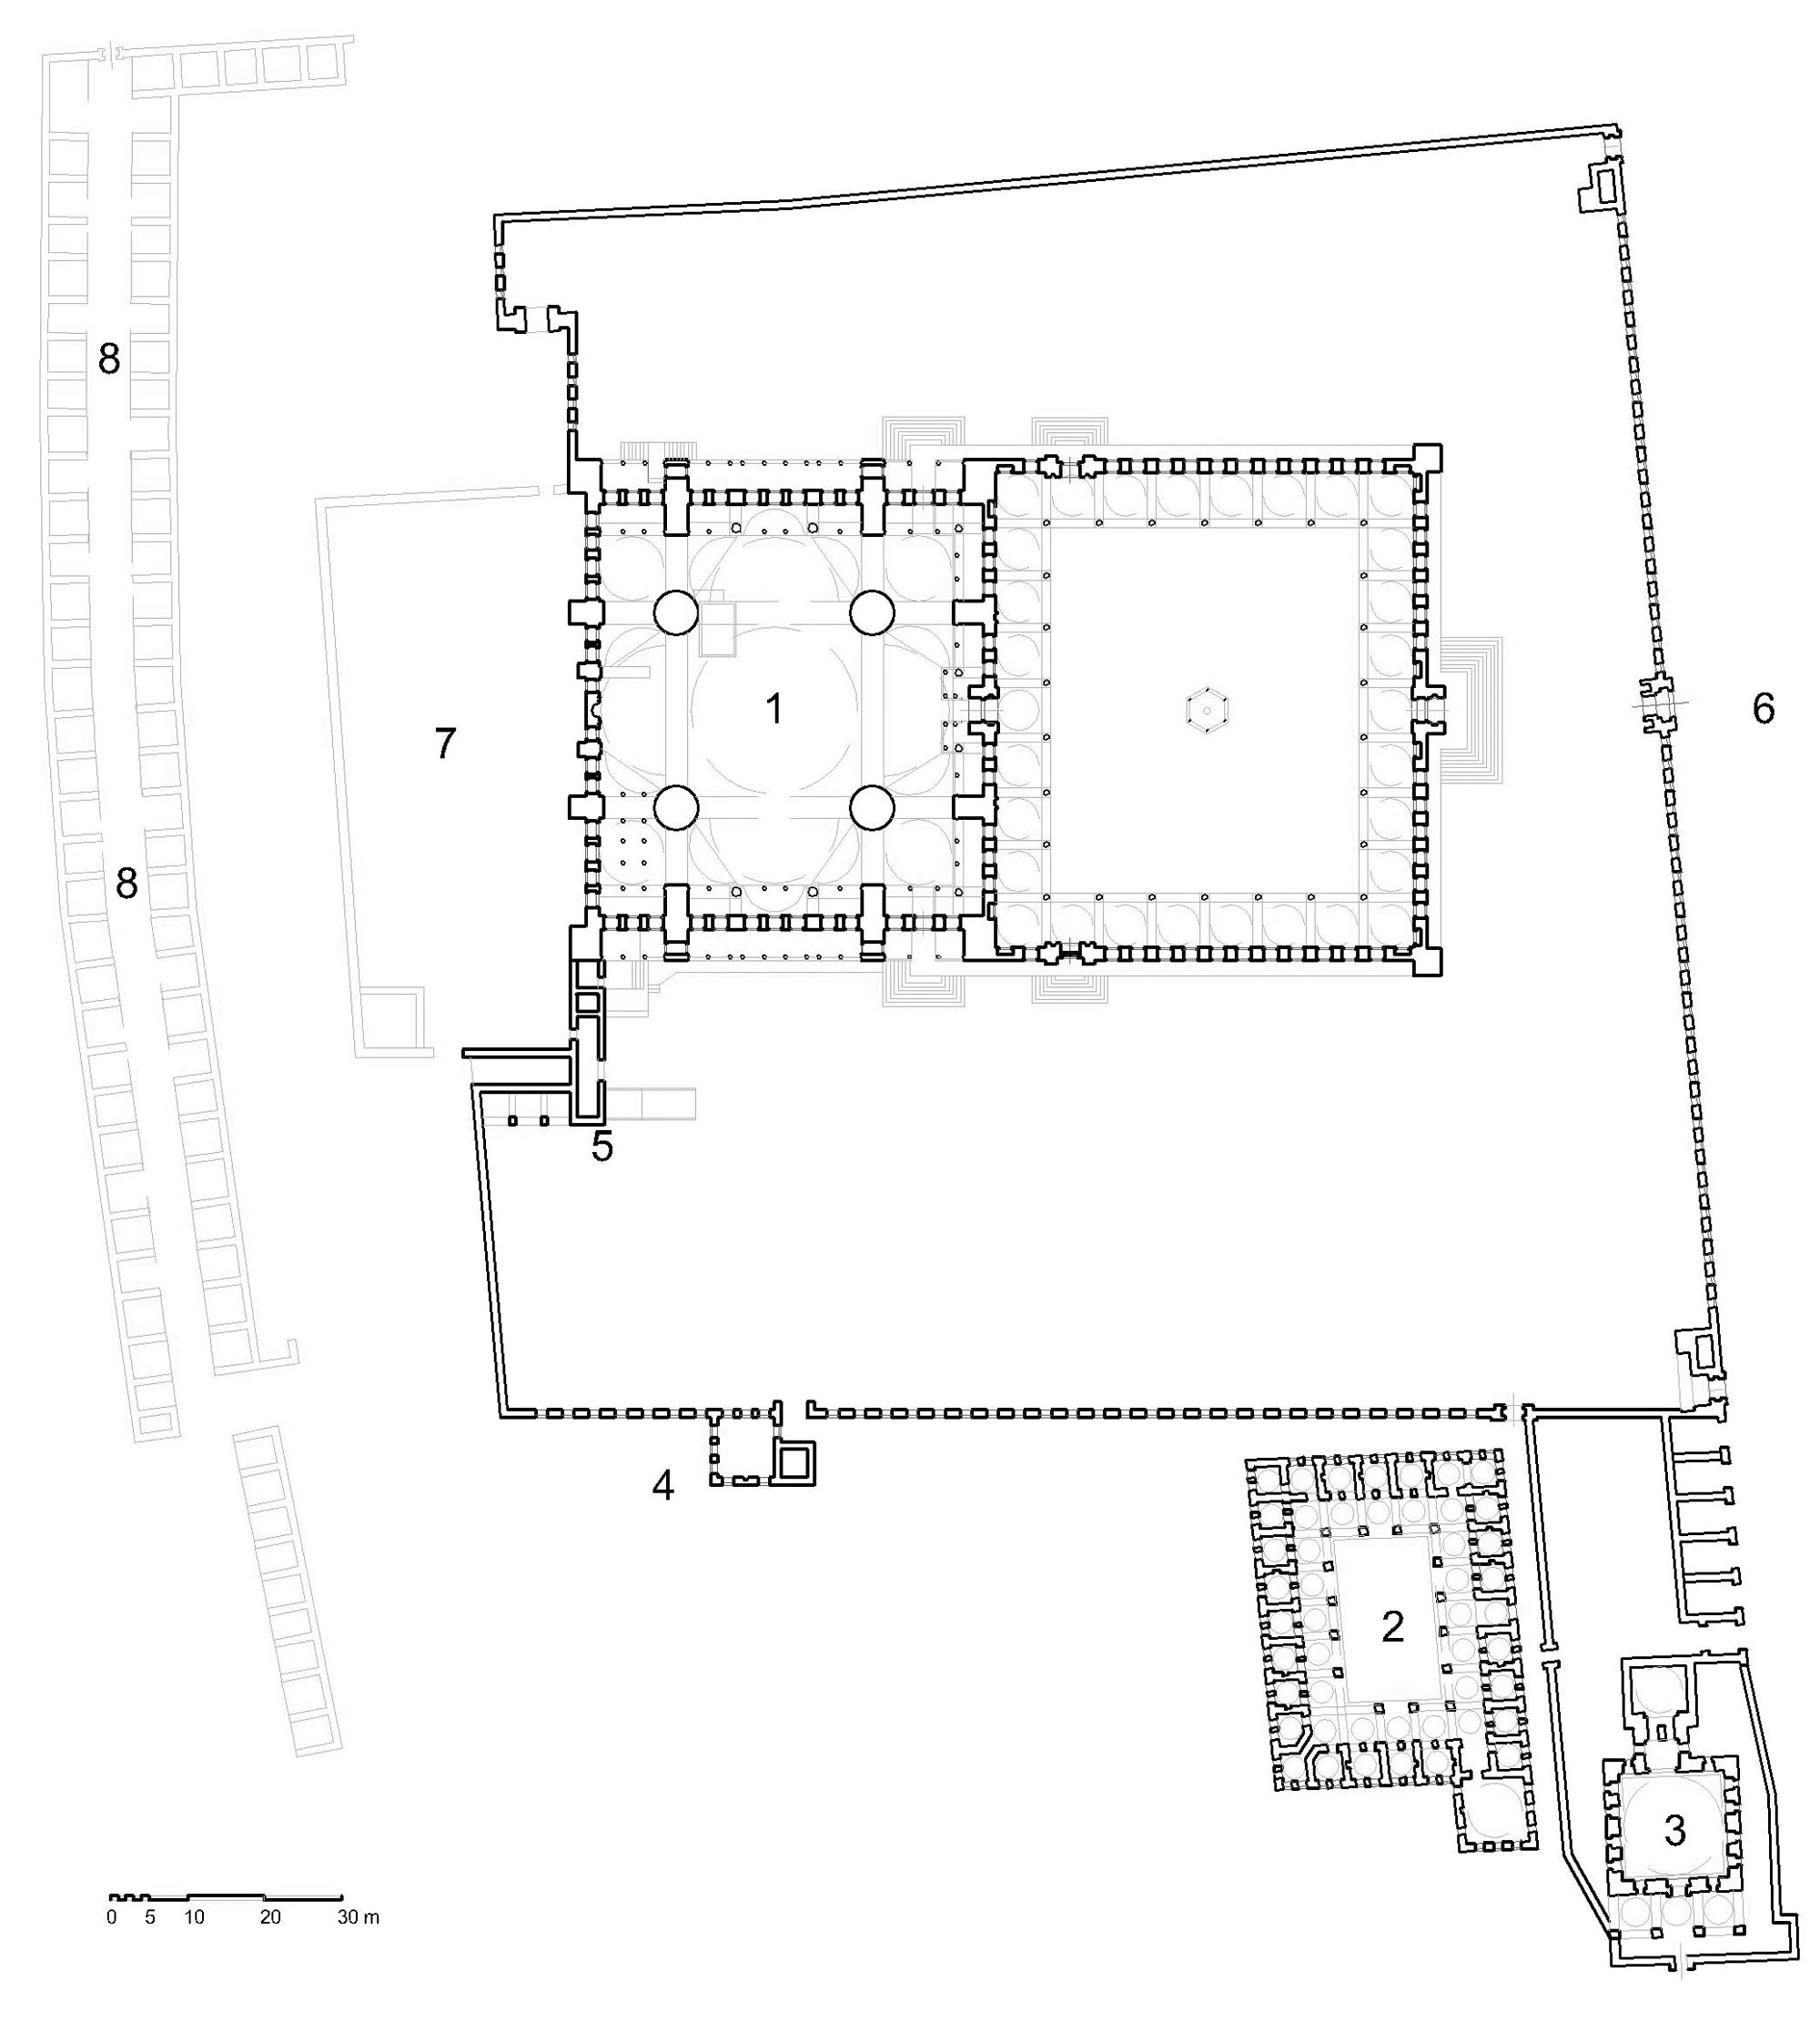 Sultanahmet Camii - Floor plan of the remaining buildings in the Sultan Ahmed I complex: (1) mosque, (2) madrasa, (3) mausoleum, (4) elementary school, (5) royal pavilion, (6) hippodrome, (7) garden platform, (8) bazaar (<i>arasta</i>). DWG file in AutoCAD 2000 format. Click the download button to download a zipped file containing the .dwg file.